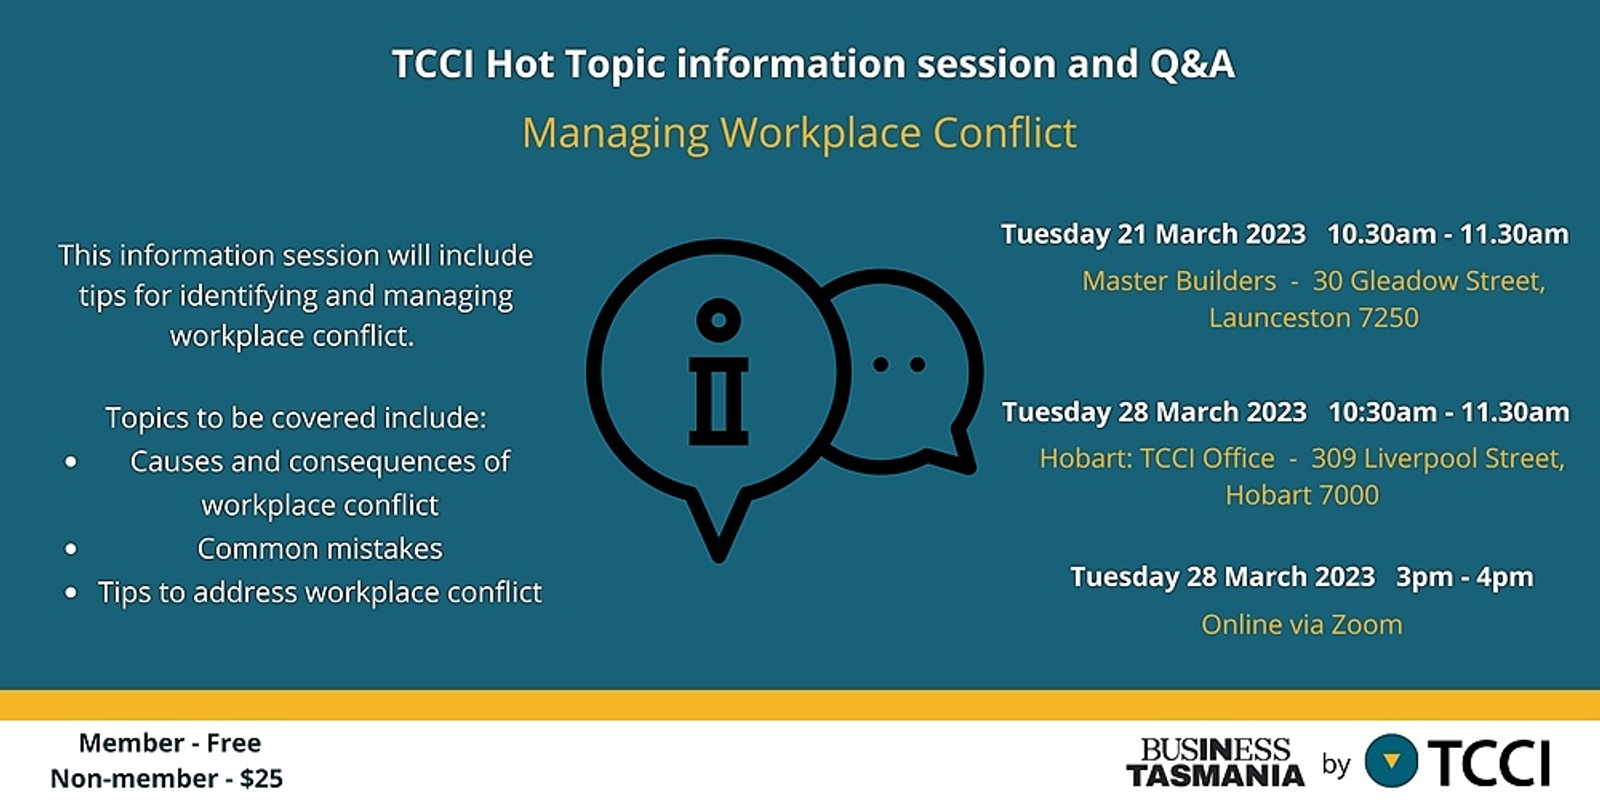 TCCI Hot Topic - Managing Workplace Conflict (Hobart) 